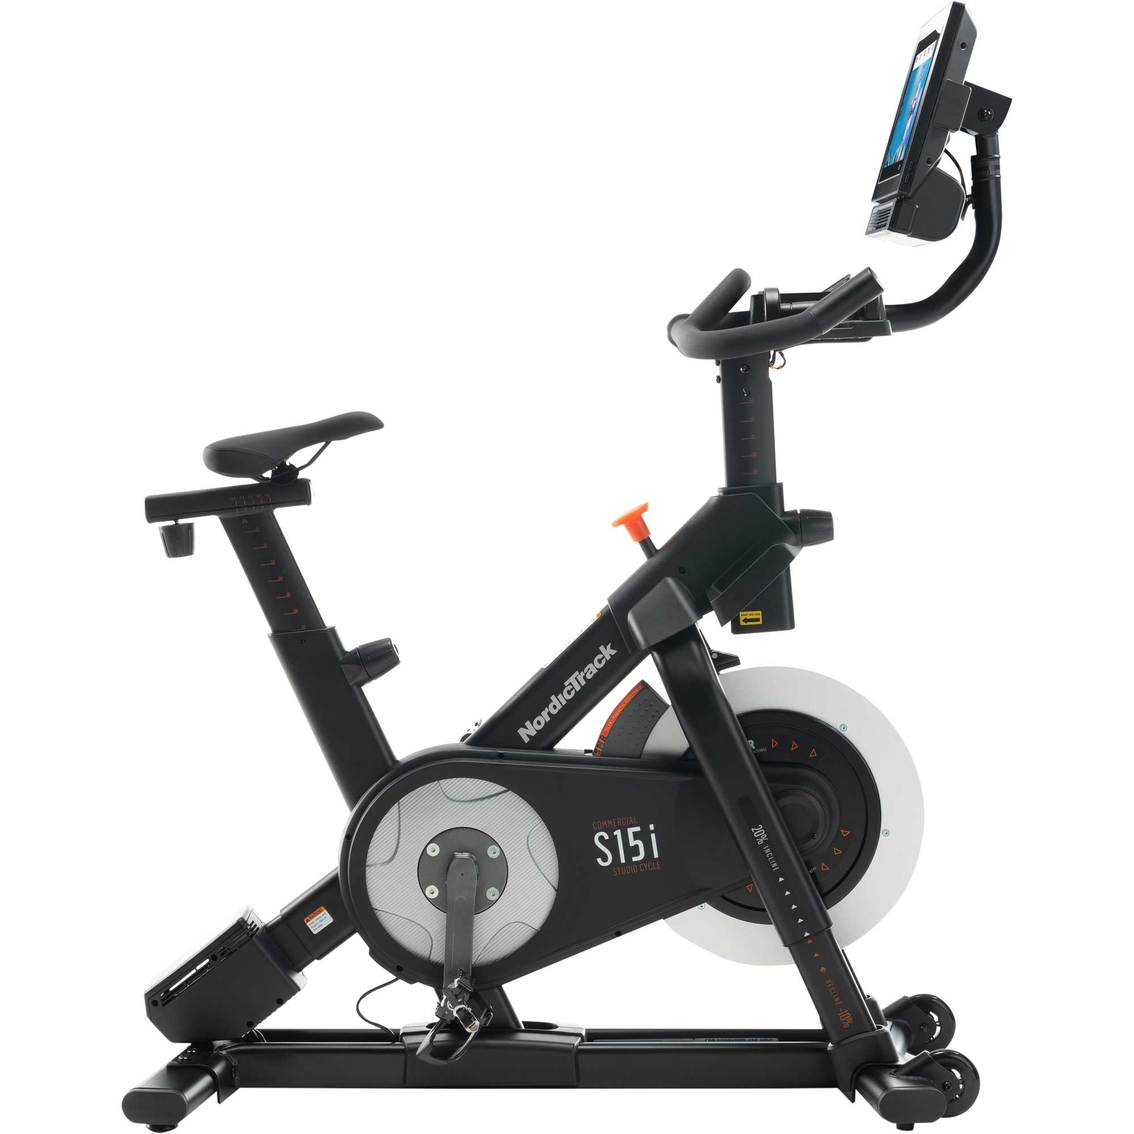 NordicTrack Commercial S15i Exercise Bike - Image 1 of 3